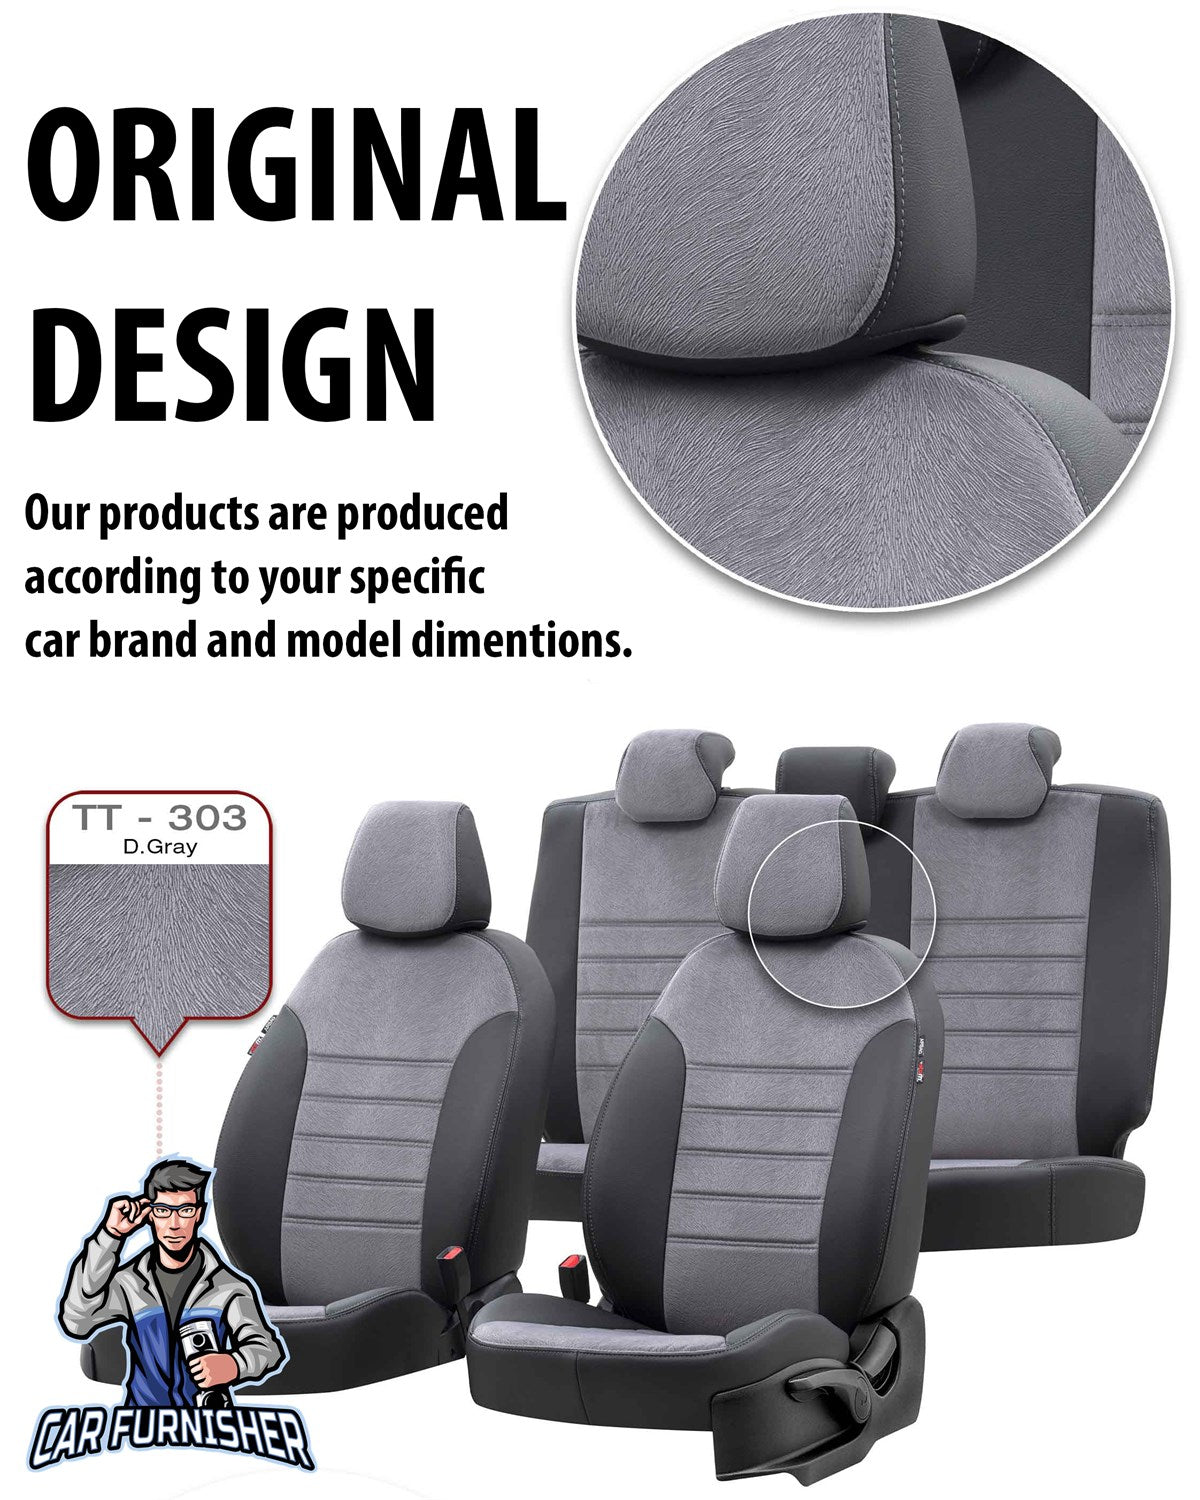 Renault Broadway Car Seat Covers 1983-2001 London Design Smoked Full Set (5 Seats + Handrest) Leather & Fabric